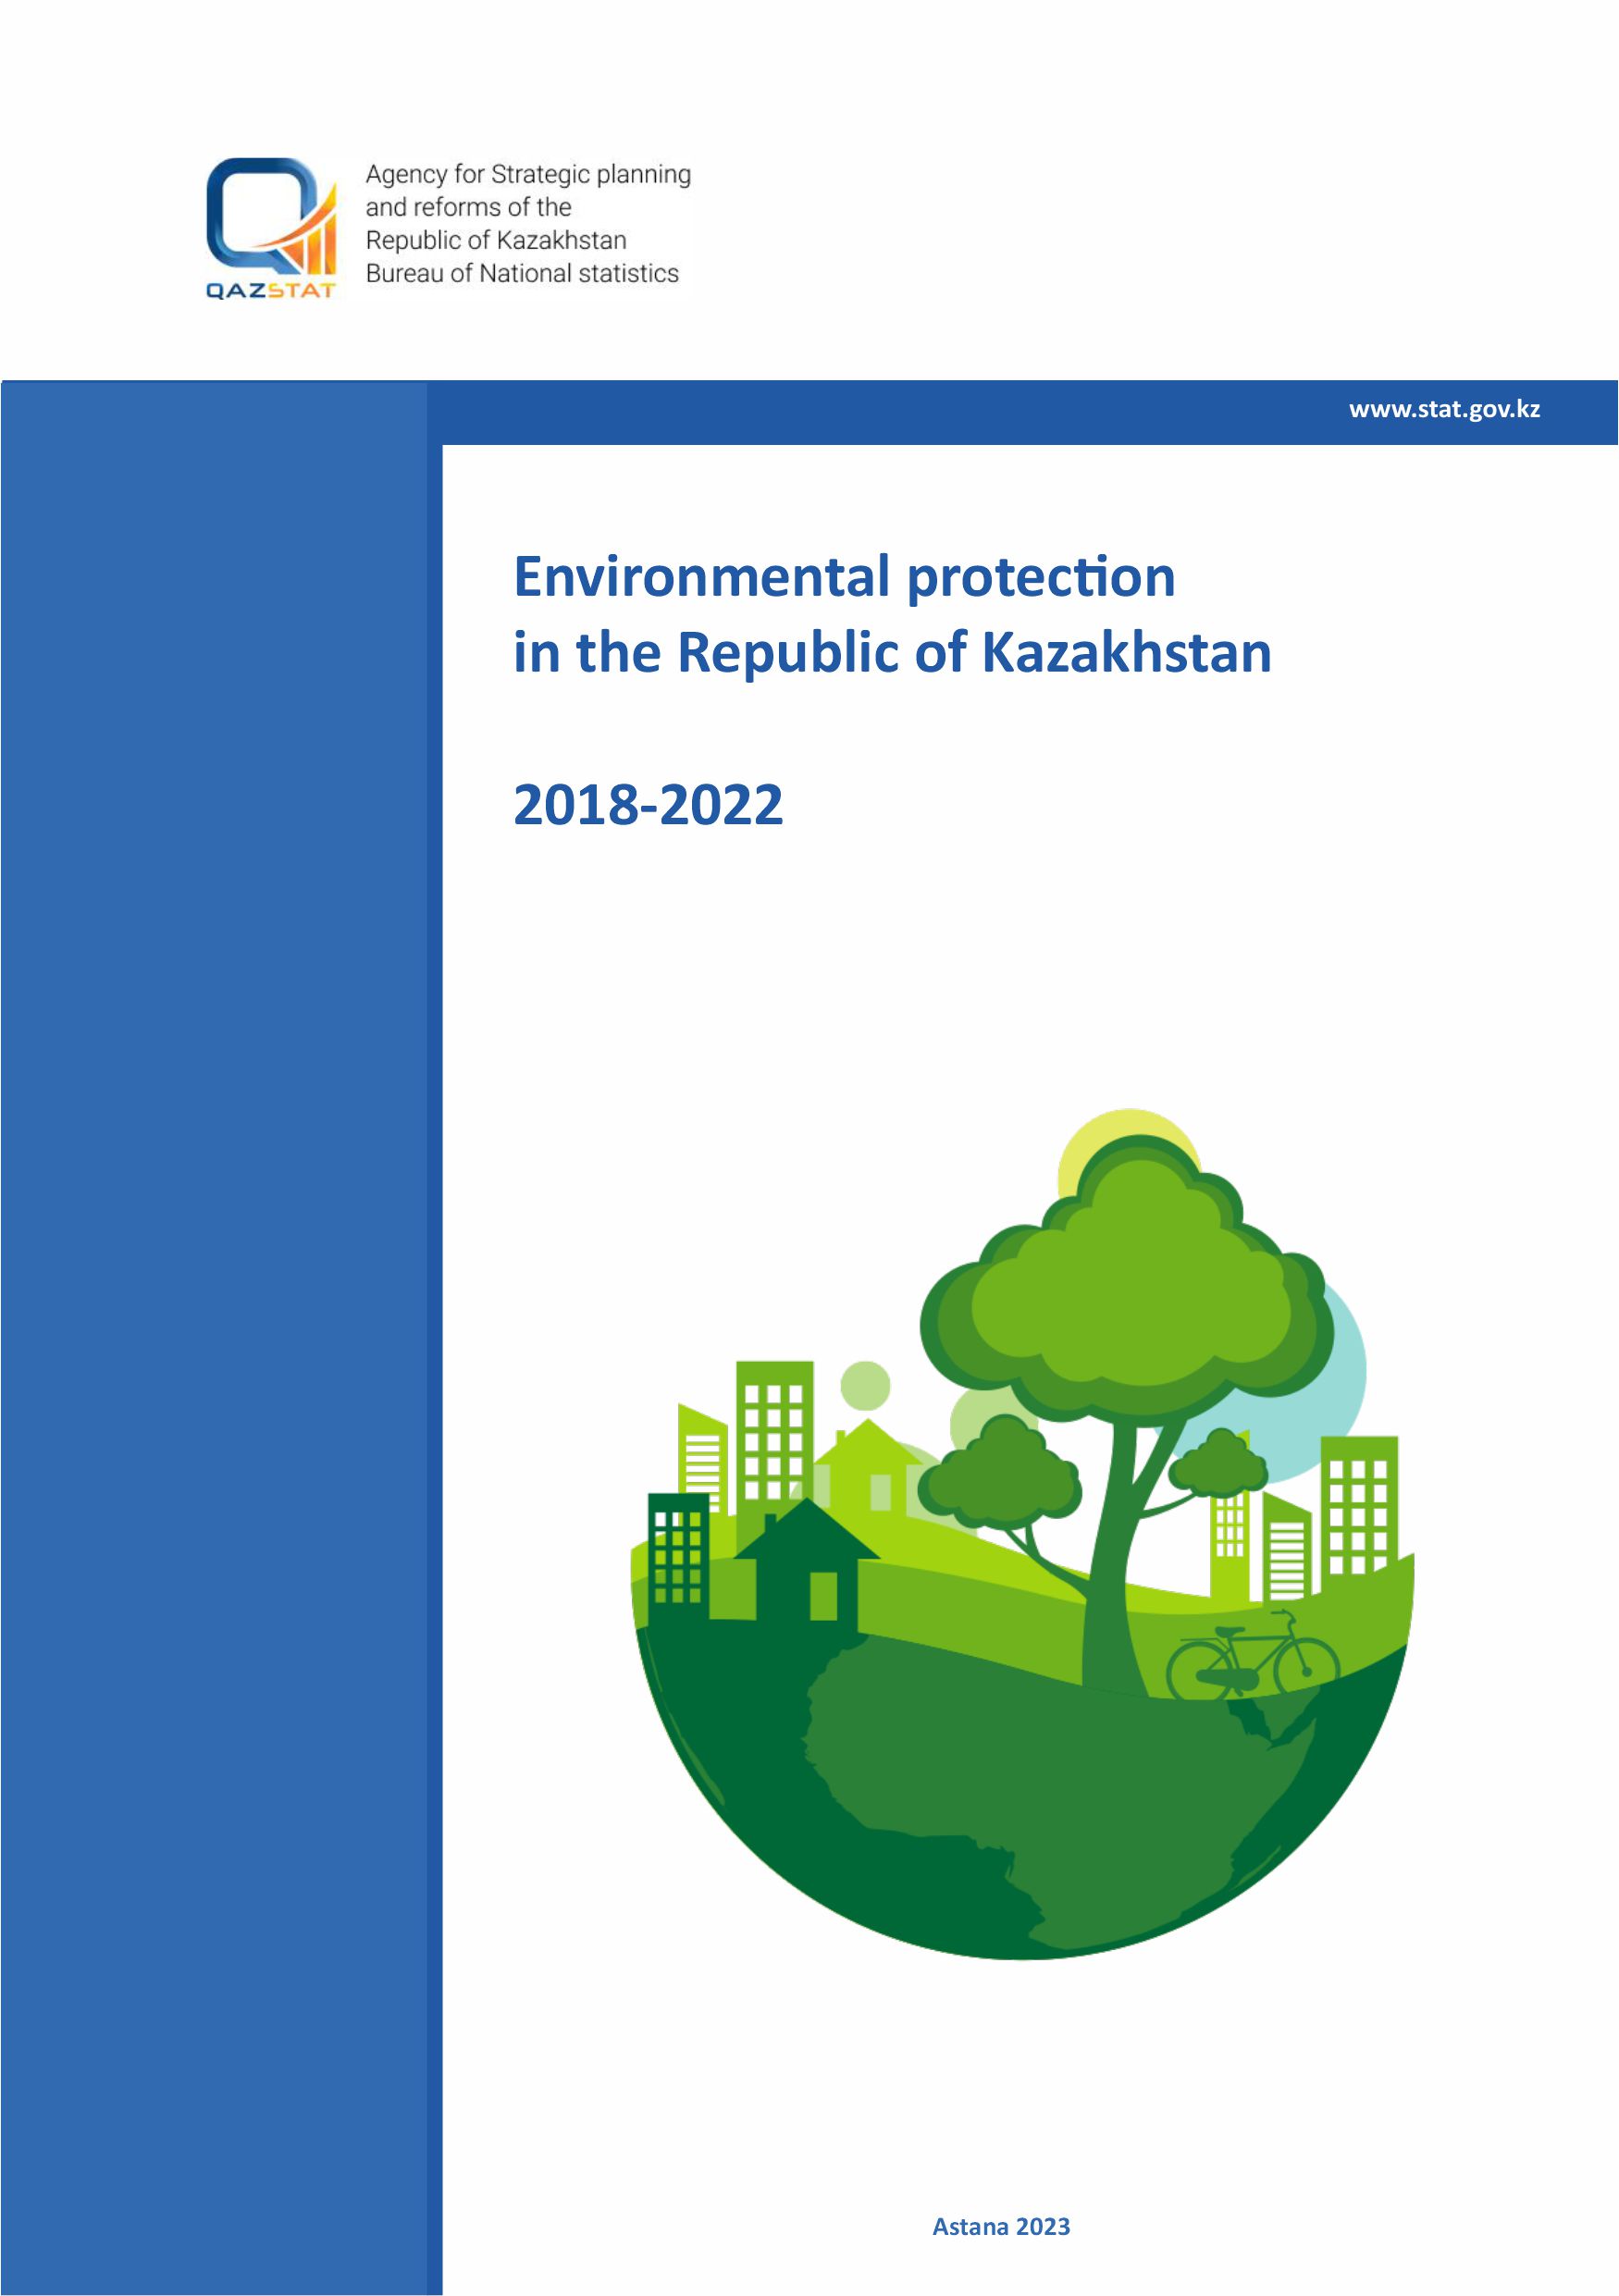 Environmental protection in the Republic of Kazakhstan